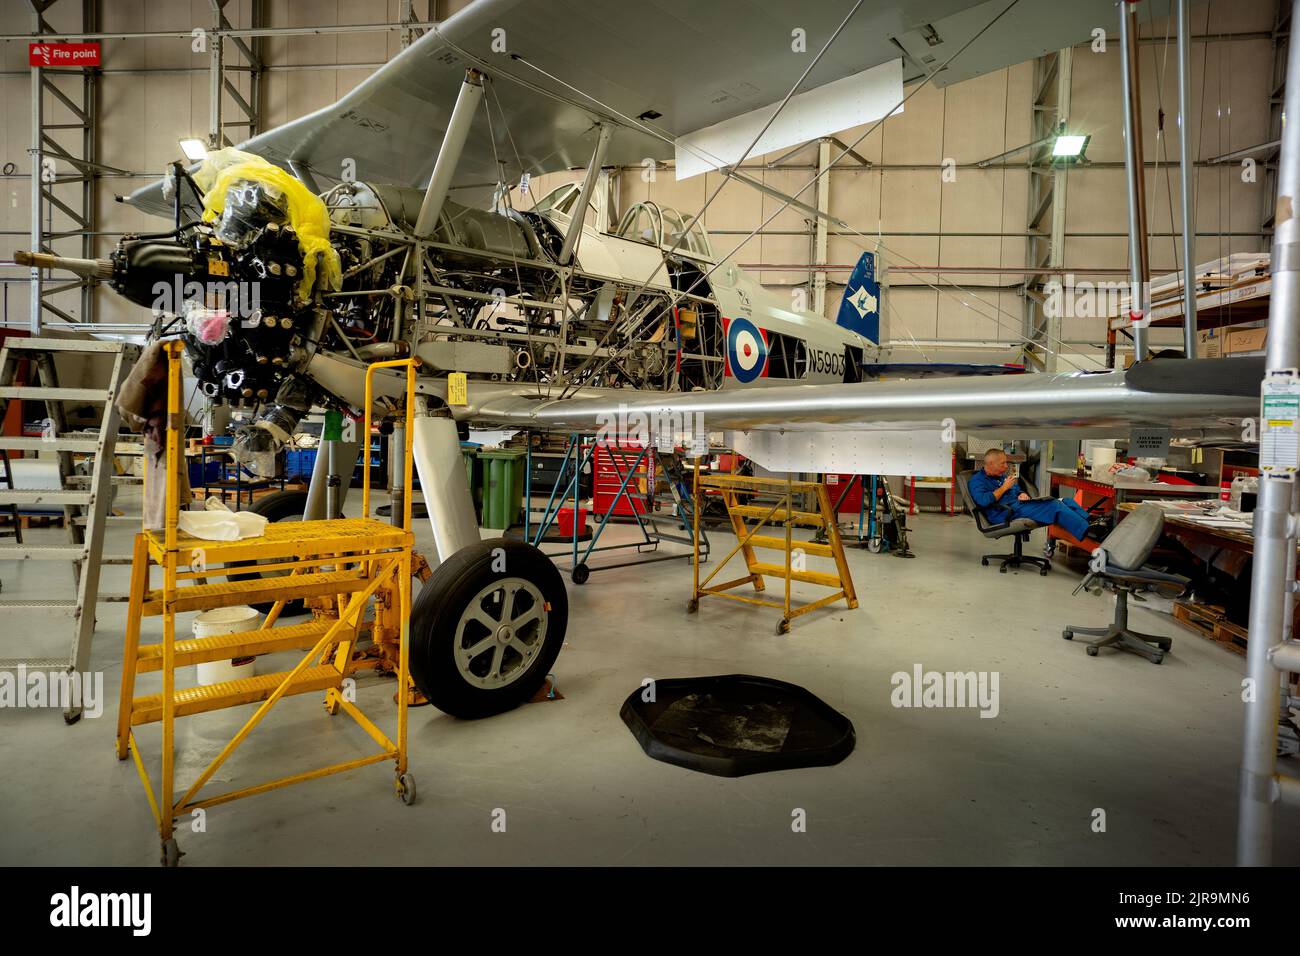 Duxford IWM Imperial War Museum Cambridgeshire England 4 Auguist 2022 In the workshop a Gloster Gladiator being restored to flying condition. The Glos Stock Photo